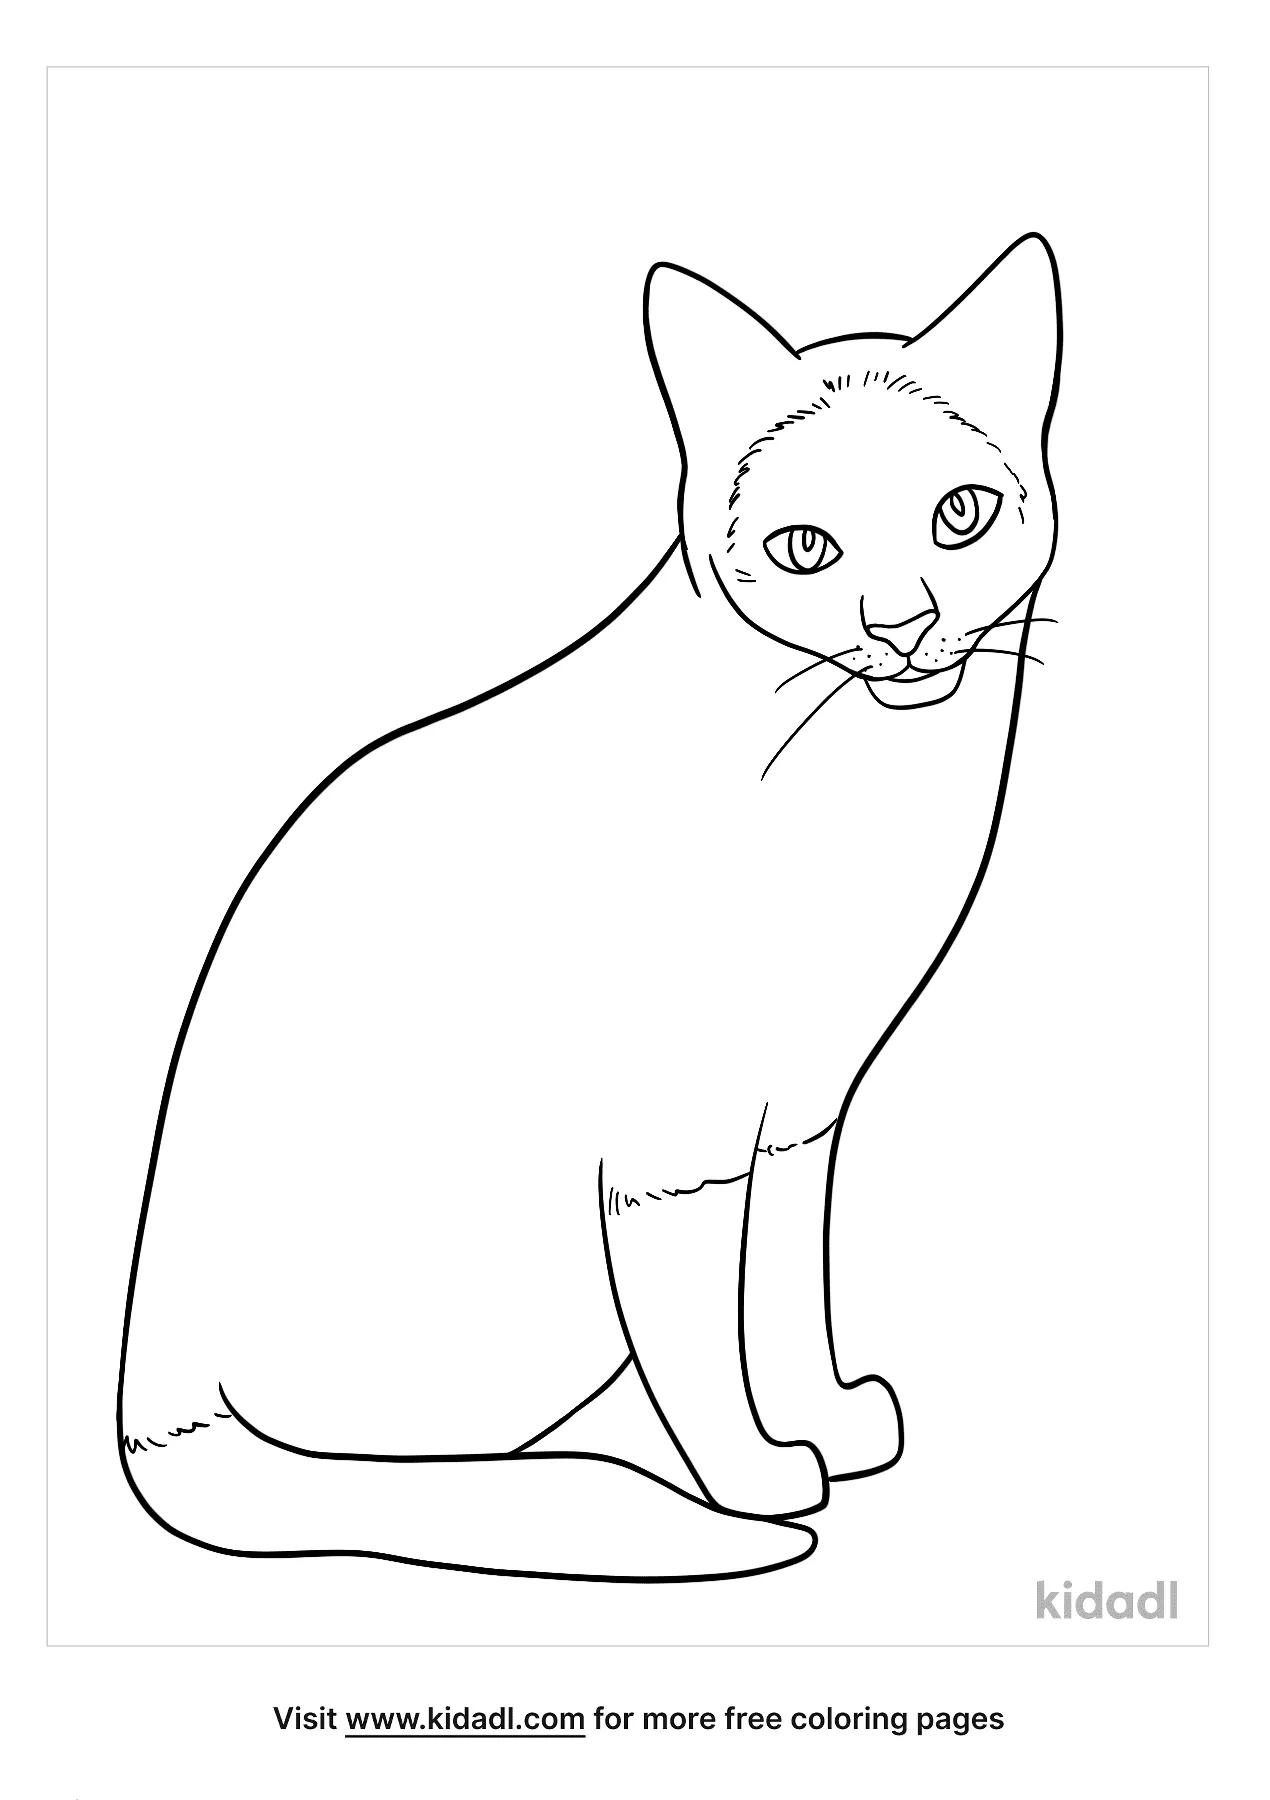 Siamese Cat Coloring Pages   Free Animals Coloring Pages   Kidadl